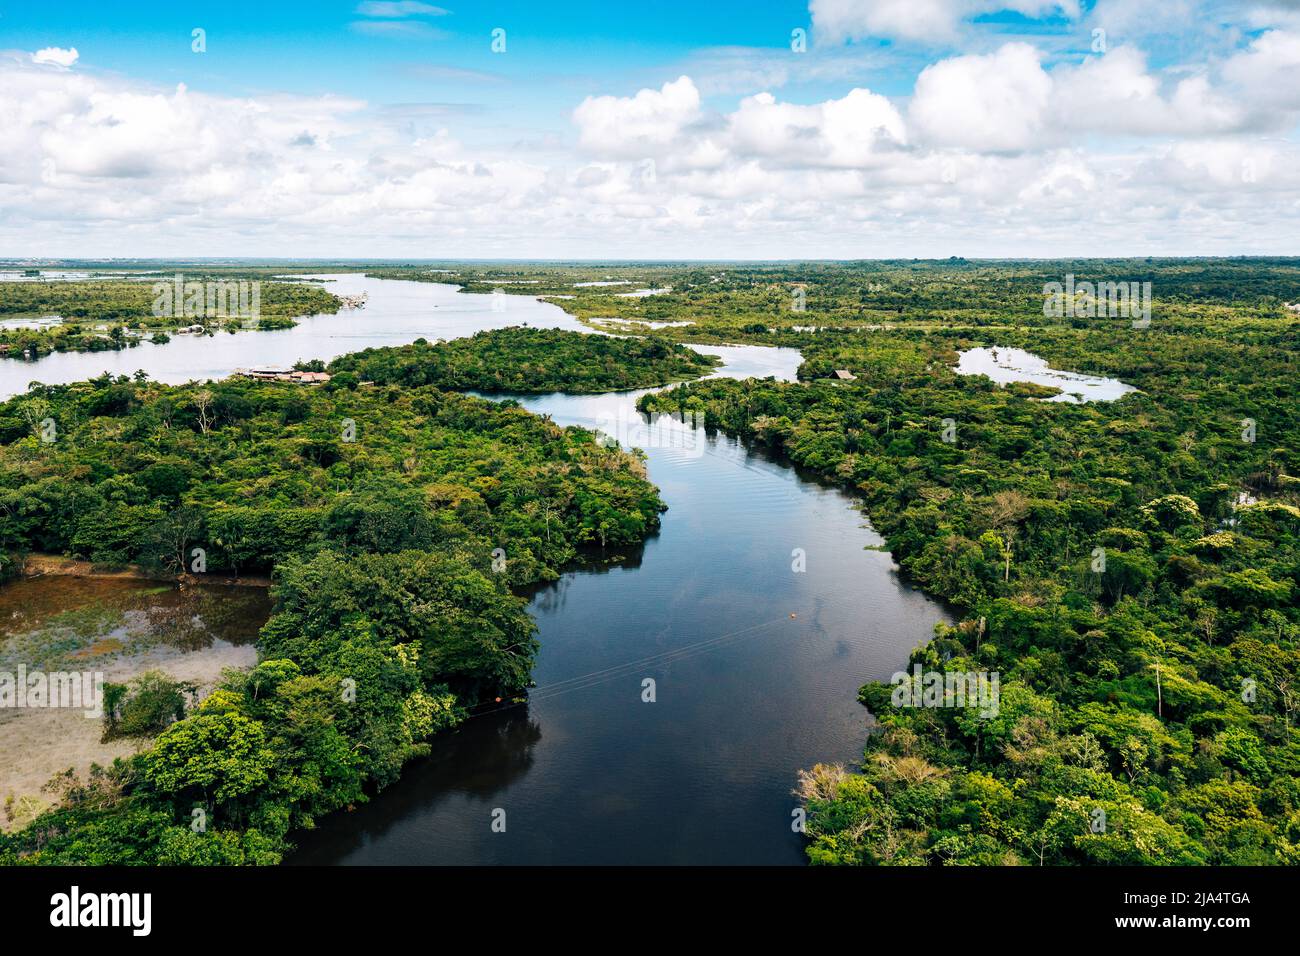 Amazon River Aerial View. Tropical Green Rainforest in Peru, South America. Bird's-eye view. Stock Photo